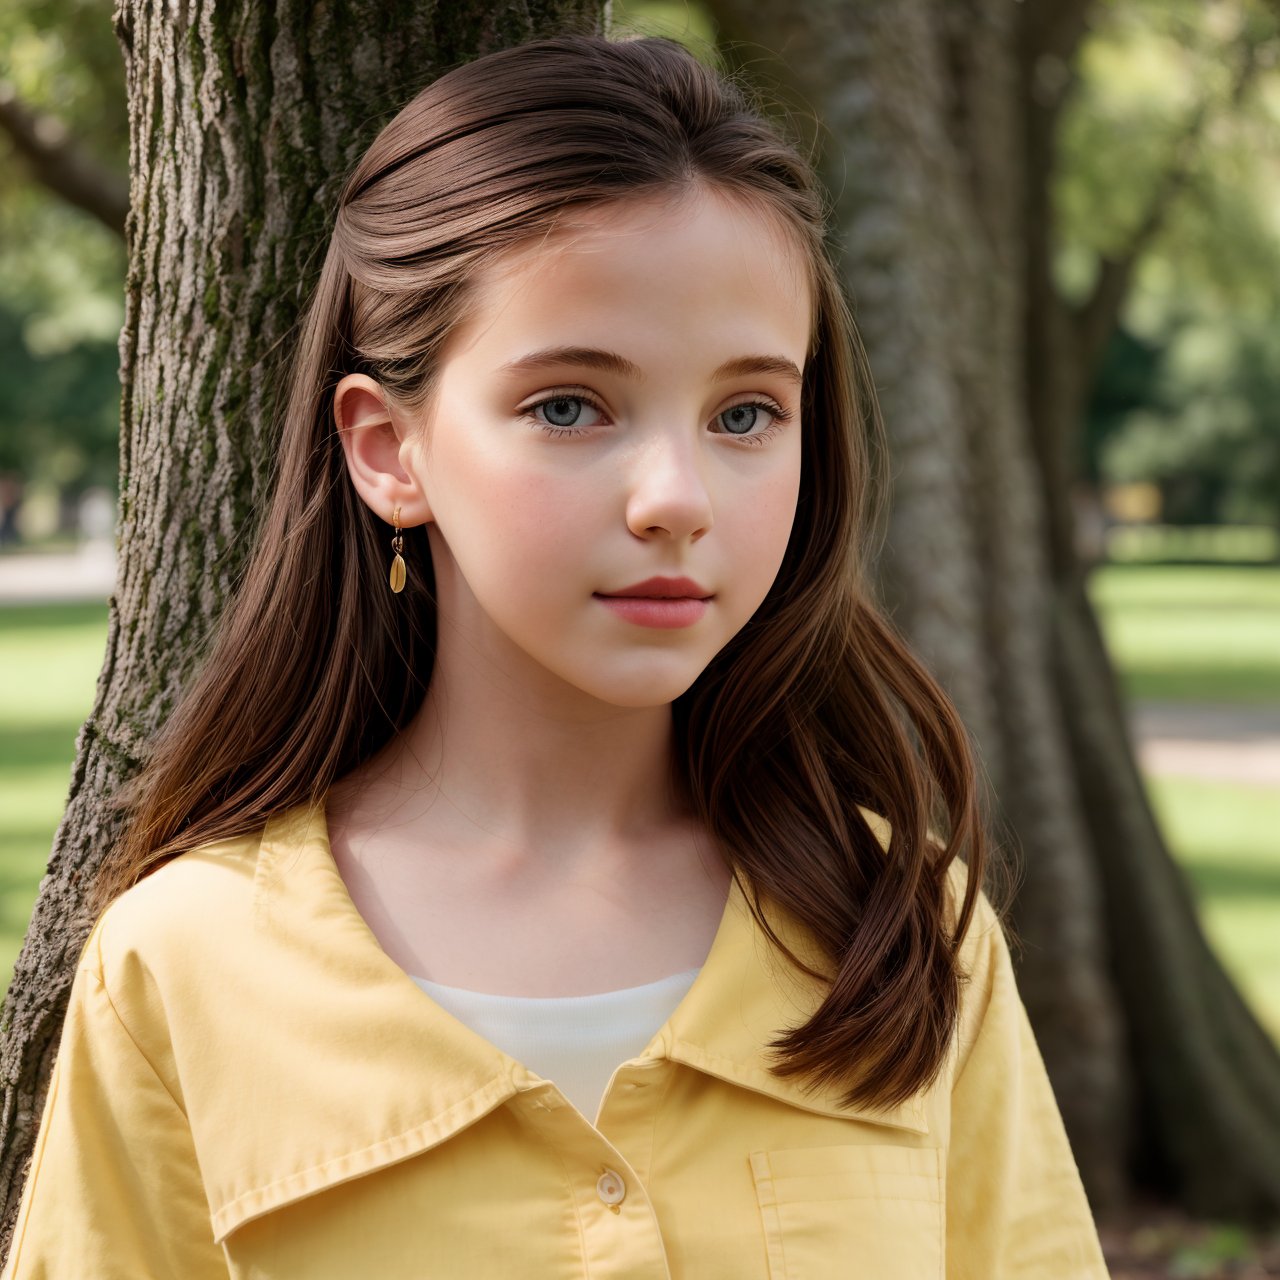 (masterpiece:1.3), best quality, view from above, portrait of beautiful (AIDA_LoRA_arusso:1.1) <lora:AIDA_LoRA_arusso:0.74> as little girl wearing a yellow shirt and jeans standing in the park next to the tree, pretty face, intimate, cinematic, hyper realistic, studio photo, studio photo, kkw-ph1, hdr, f1.5, getty images, (colorful:1.1)